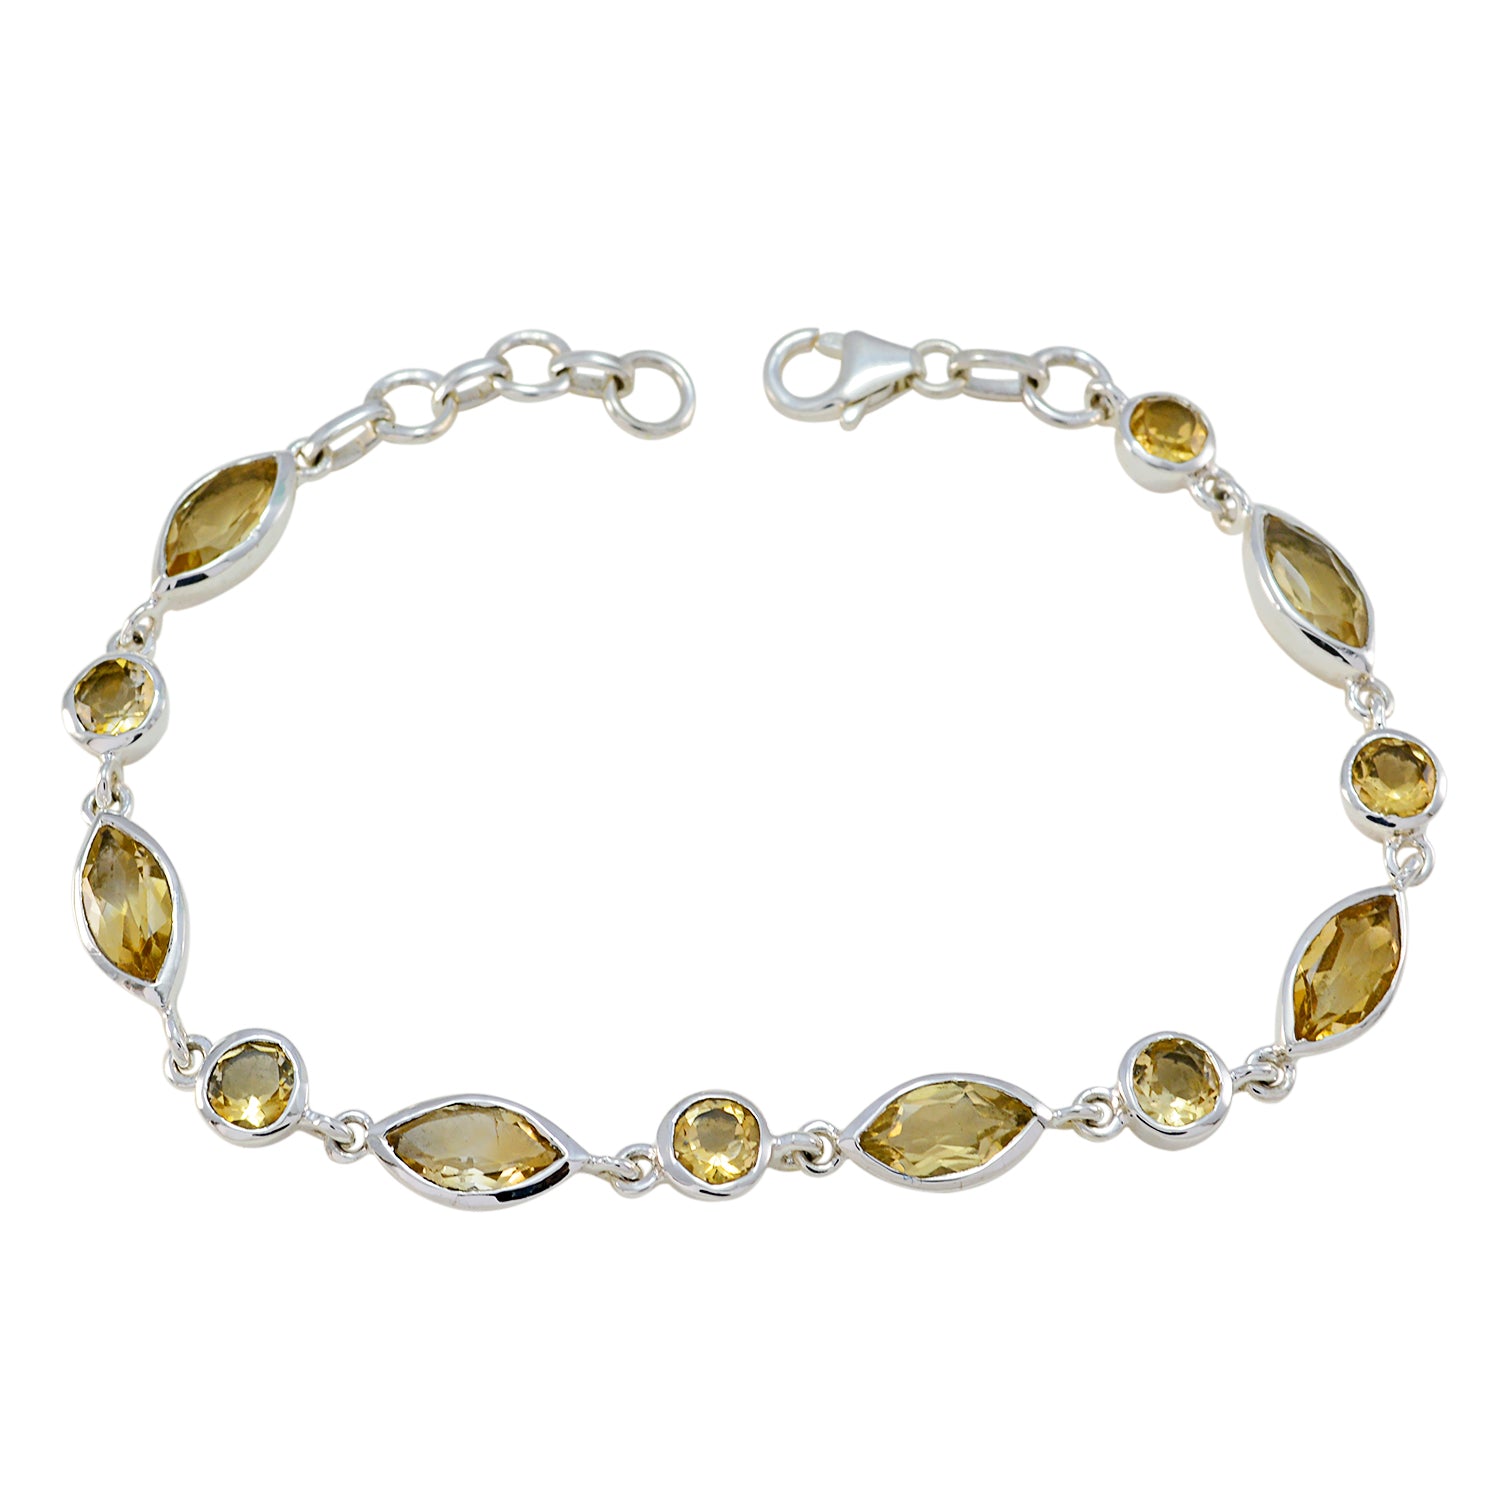 Riyo Good Gemstones Round/Marquise Faceted Yellow Citrine Silver Bracelets easter Sunday gift